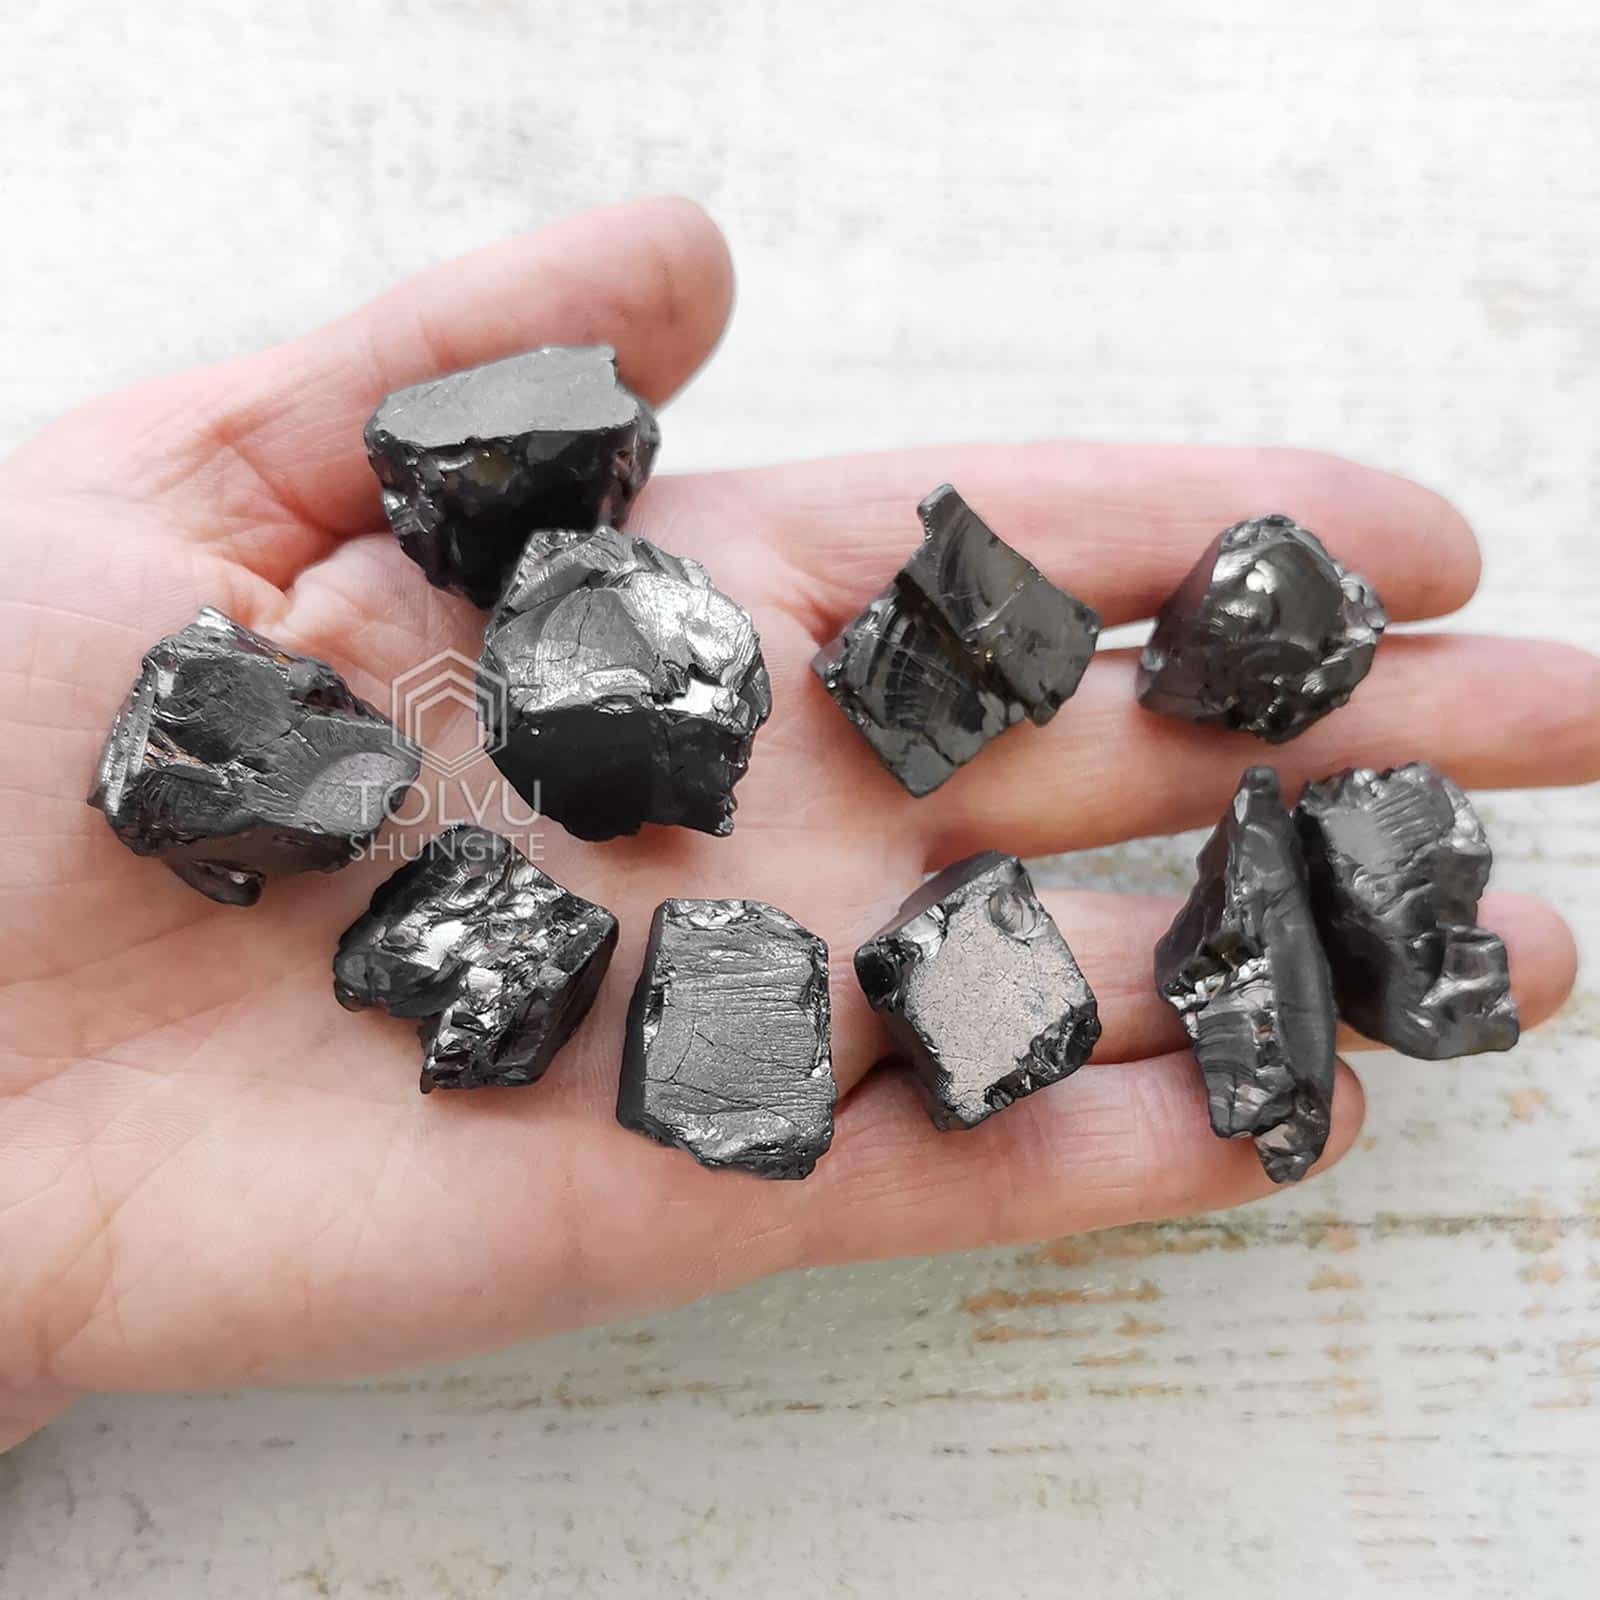 Elite shungite stones of 5-9 grams in package 0.11 lbs and more